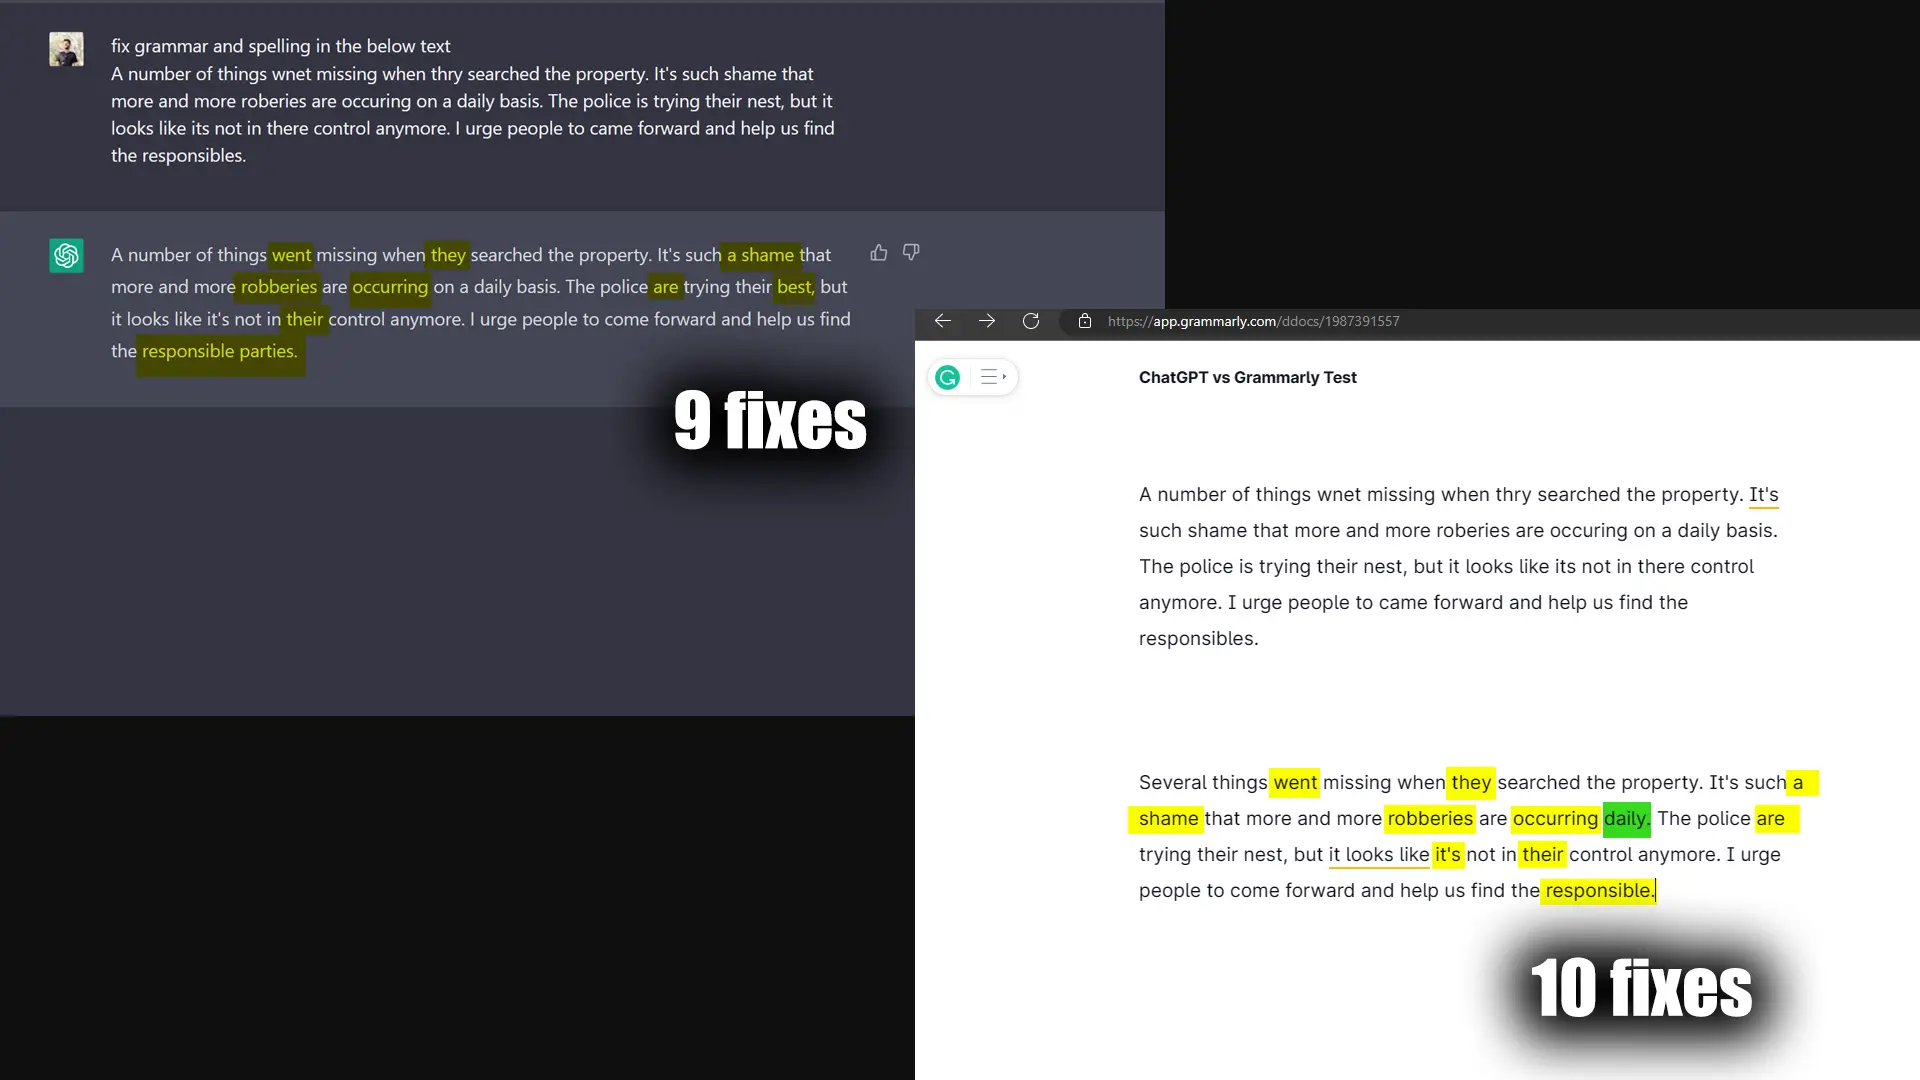 ChatGPT and Grammarly Fixing Grammar 2